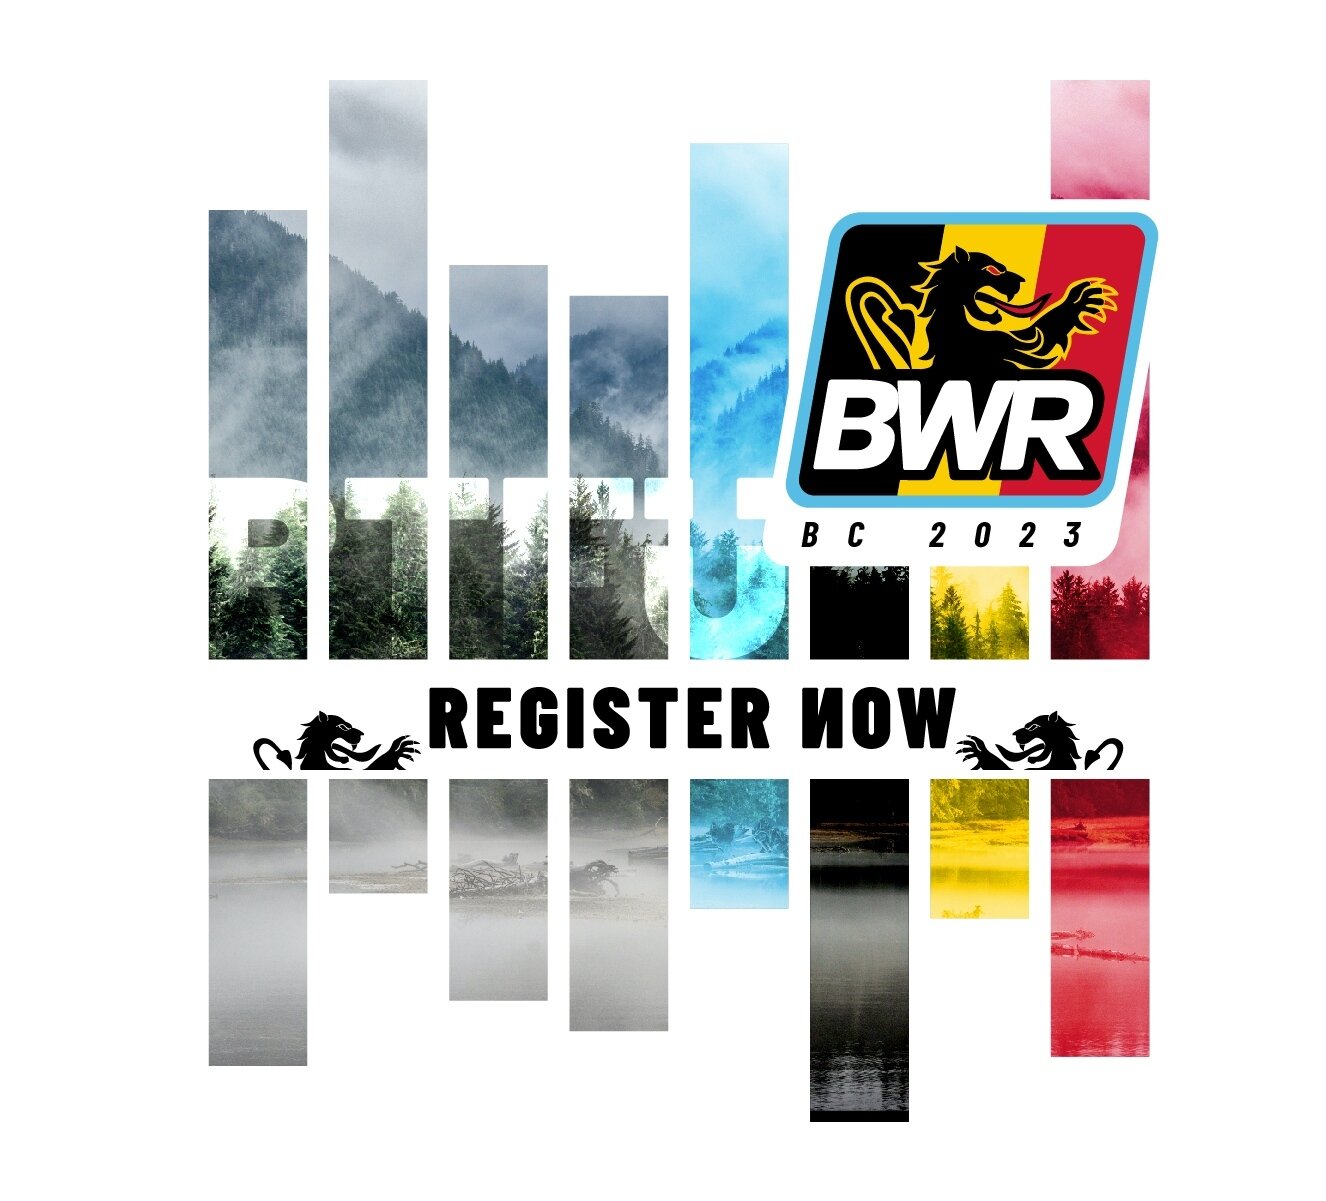 🧇🚴🌲 Calling all adventure-seeking cyclists! 🌲🚴🧇⁠
⁠
Gear up and join the wild ride as TransRockies makes its way to the Belgian Waffle Ride BC! 🇧🇪🍁 Prepare to pedal through breathtaking landscapes while satisfying your hunger for adrenaline a